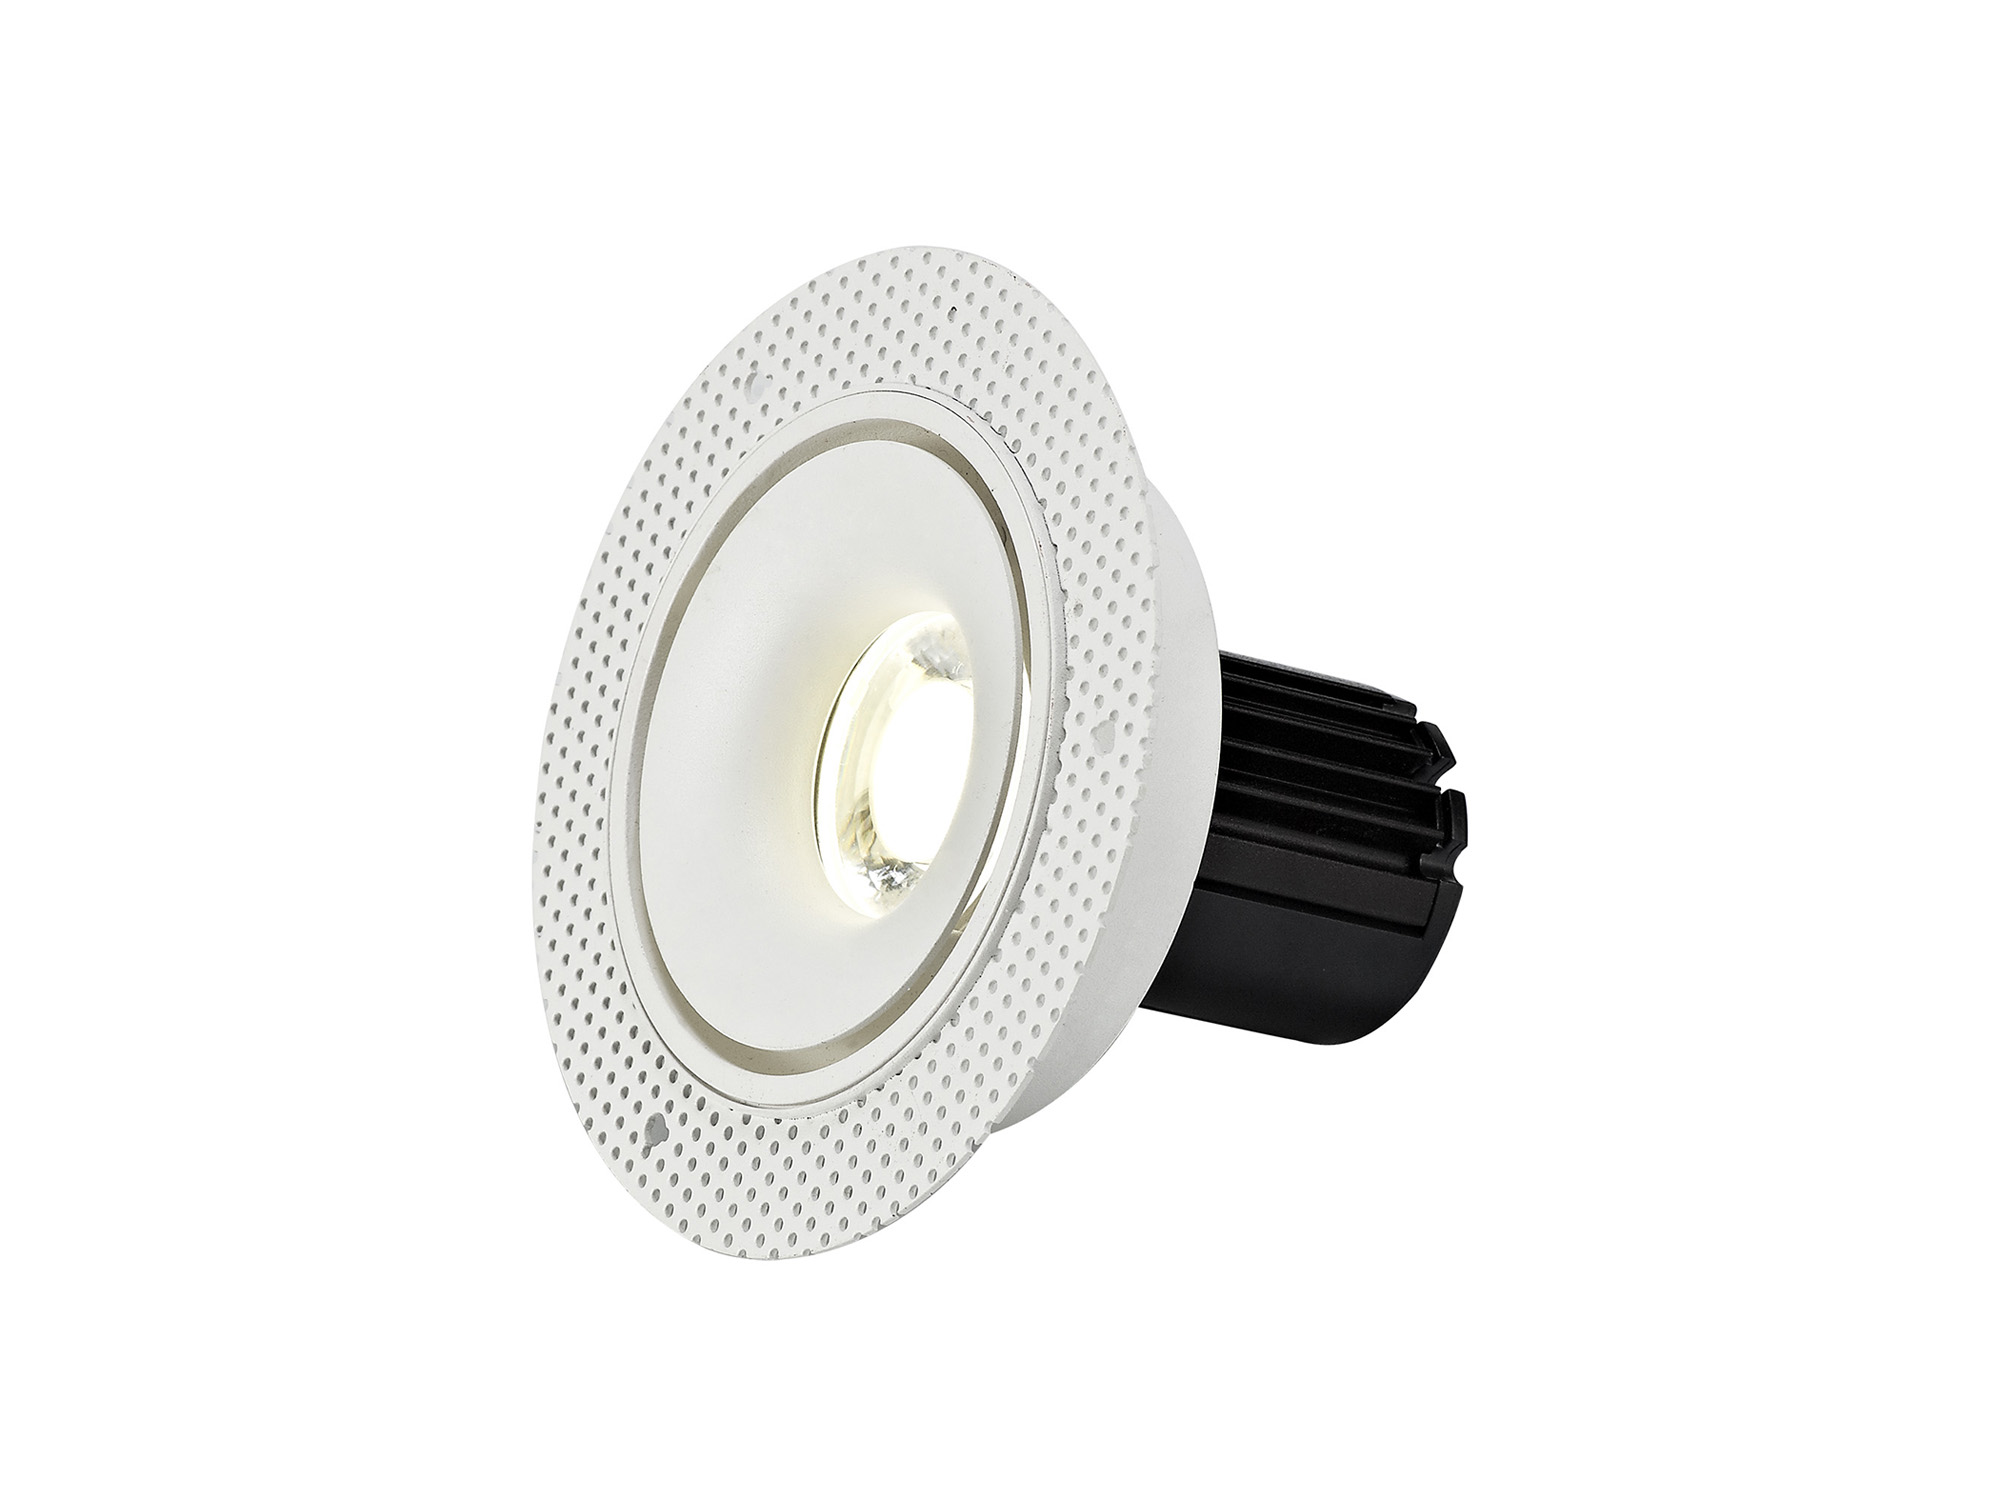 DM201087  Bolor T 10 Tridonic Powered 10W 4000K 810lm 36° CRI>90 LED Engine White/White Trimless Fixed Recessed Spotlight; IP20